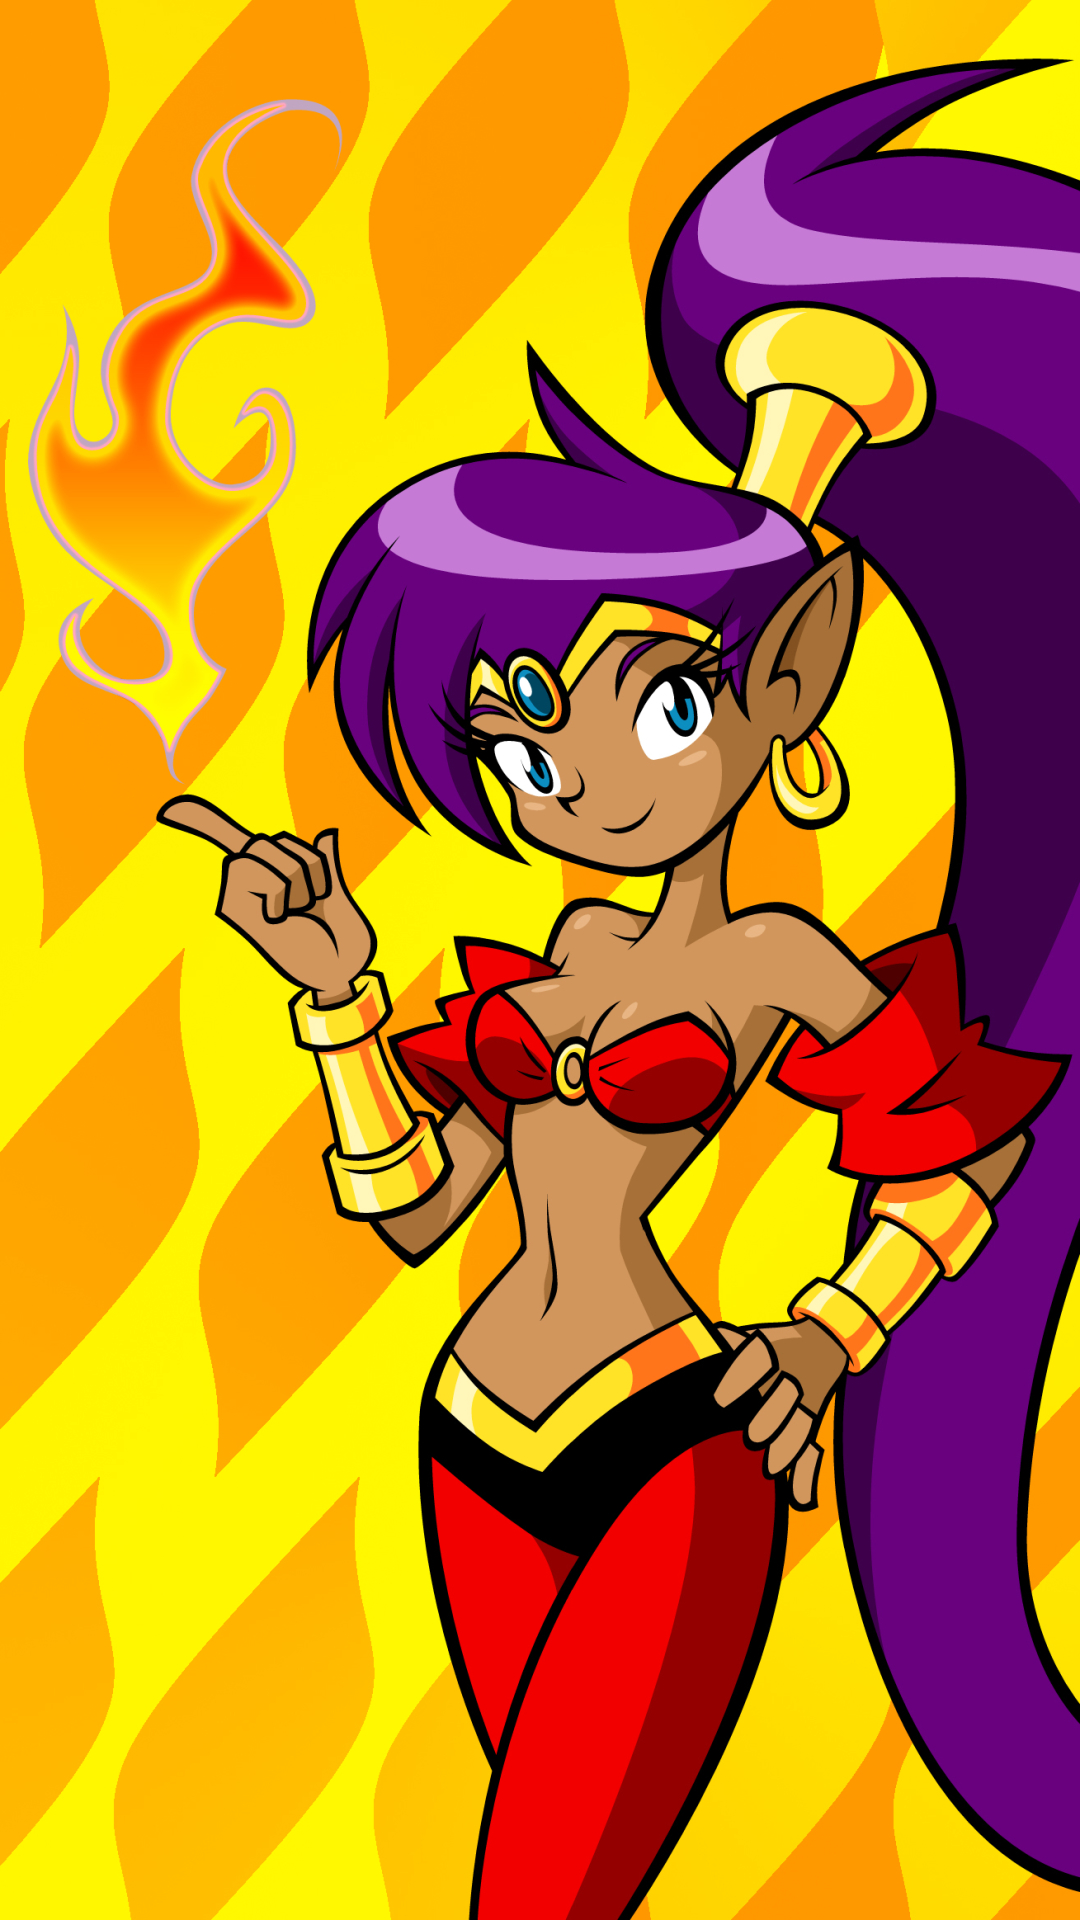 WallpapersWide.com | High Resolution Desktop Wallpapers tagged with shantae  | Page 1